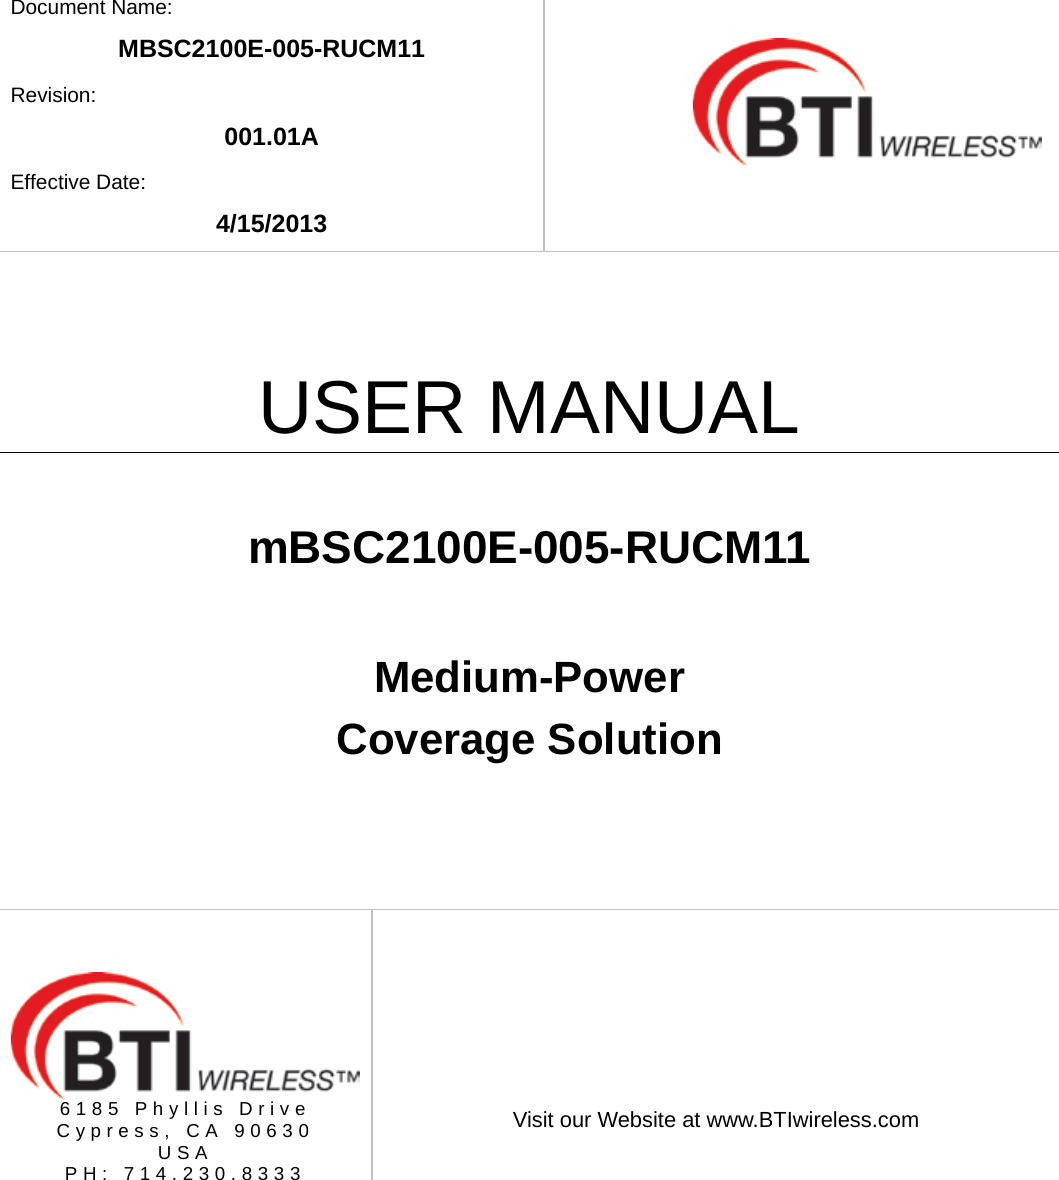   Document Name: MBSC2100E-005-RUCM11 Revision: 001.01A Effective Date: 4/15/2013    USER MANUAL  mBSC2100E-005-RUCM11  Medium-Power   Coverage Solution       6185 Phyllis Drive Cypress, CA 90630 USA PH: 714.230.8333   Visit our Website at www.BTIwireless.com  